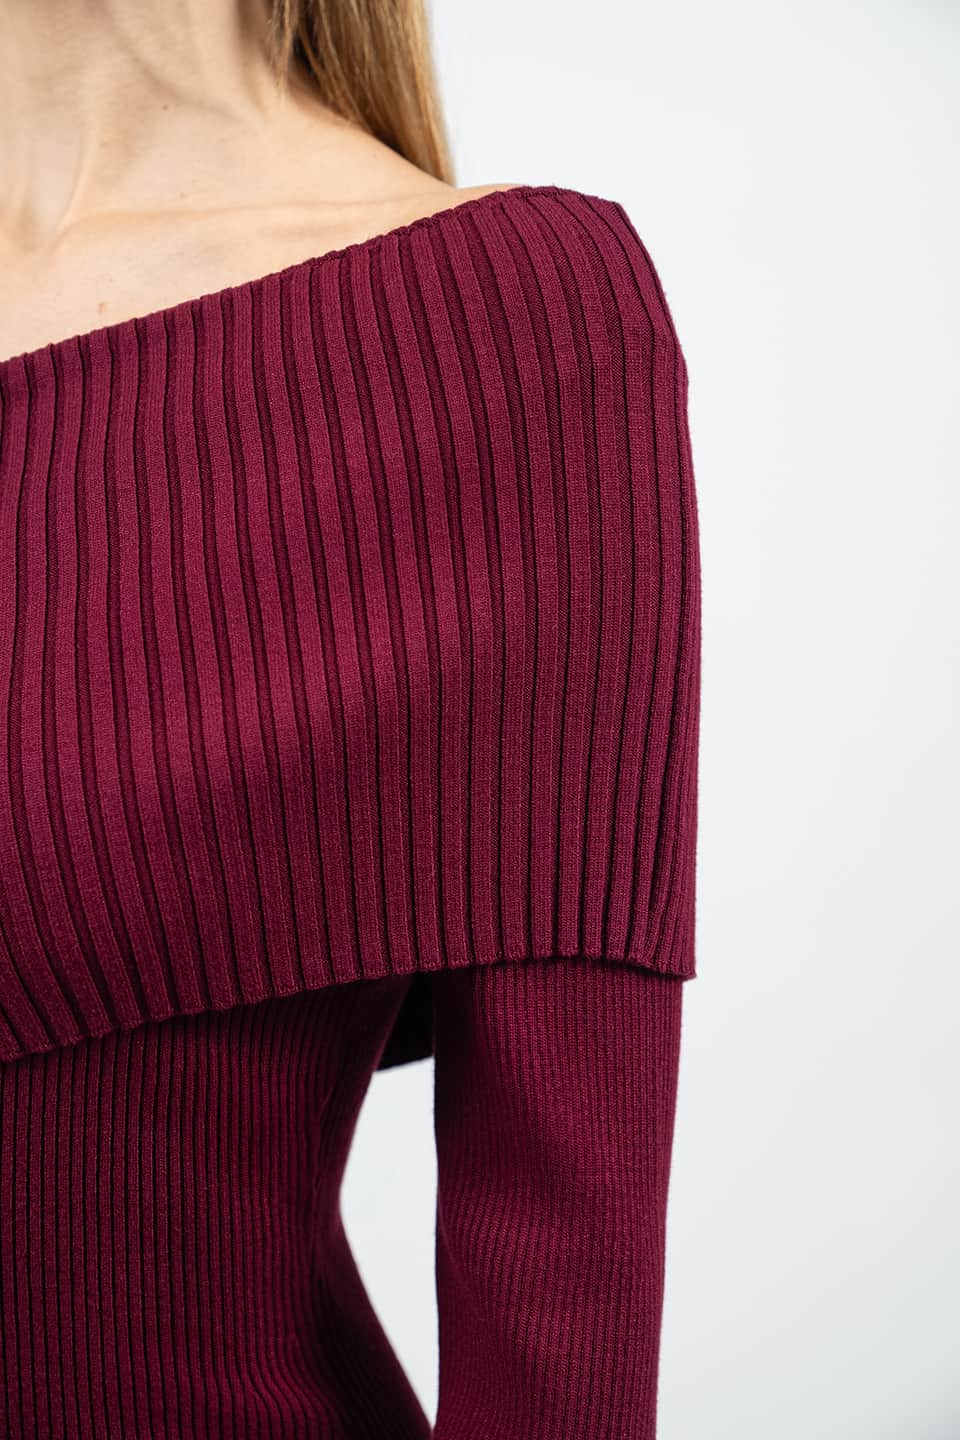 Thumbnail for Product gallery 6, Burgundy One Sided Knit Dress